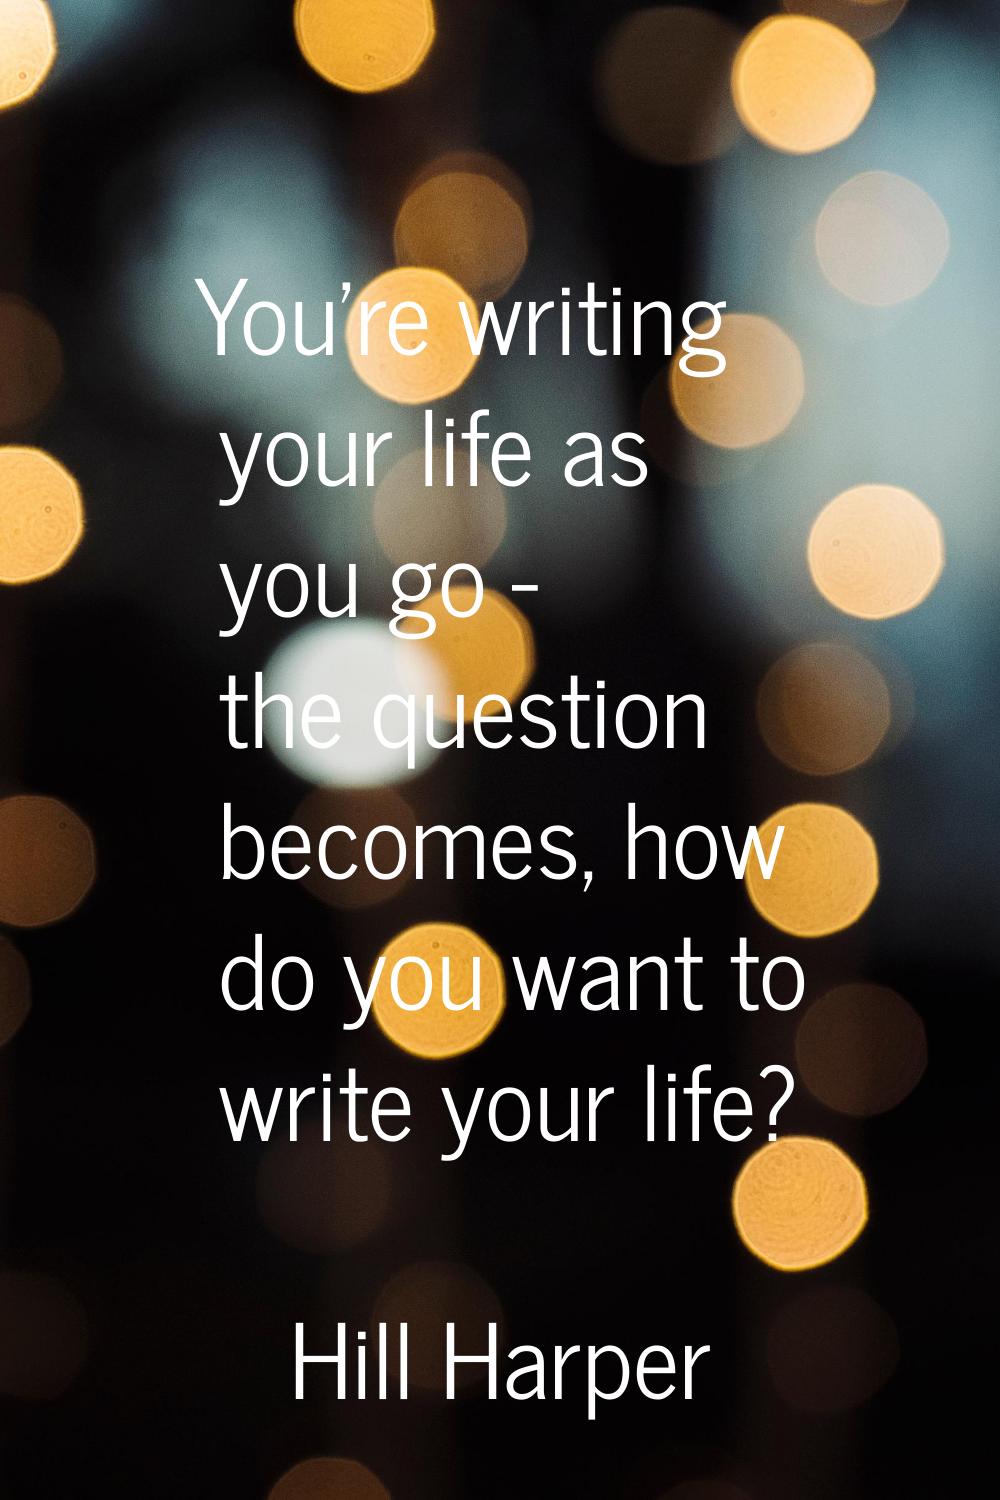 You're writing your life as you go - the question becomes, how do you want to write your life?